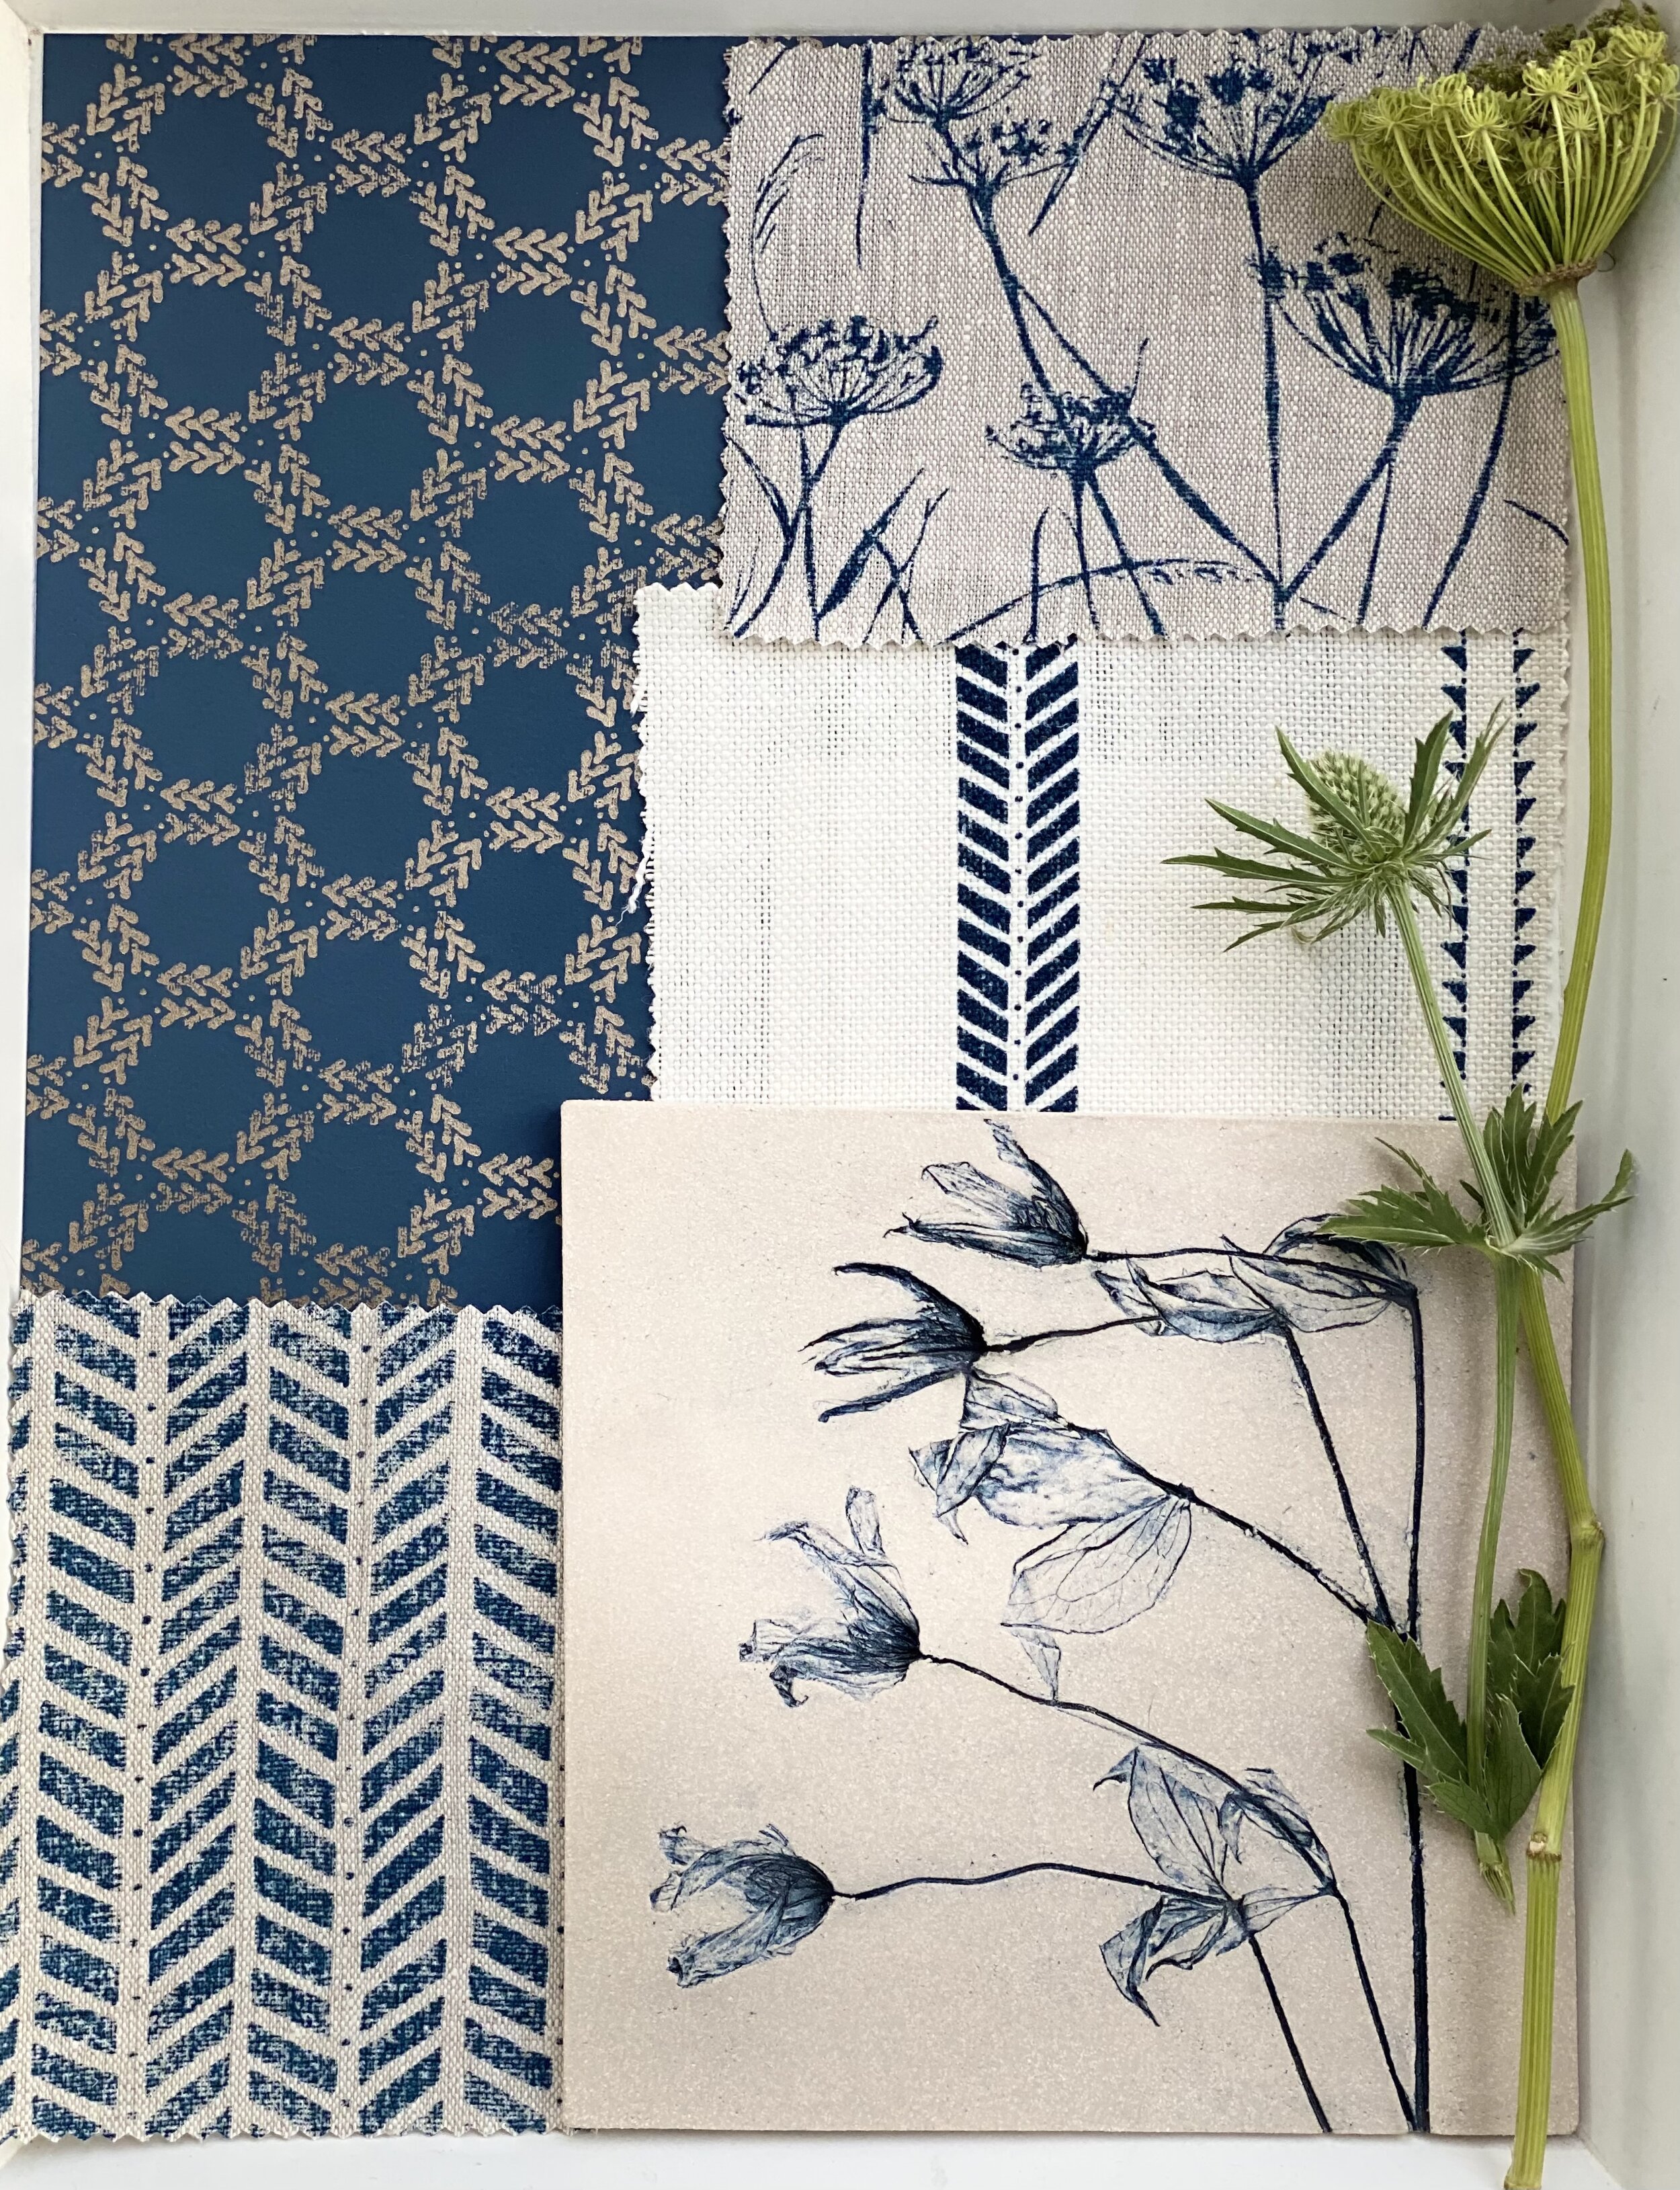 Design ideas for Inky Blue schemes